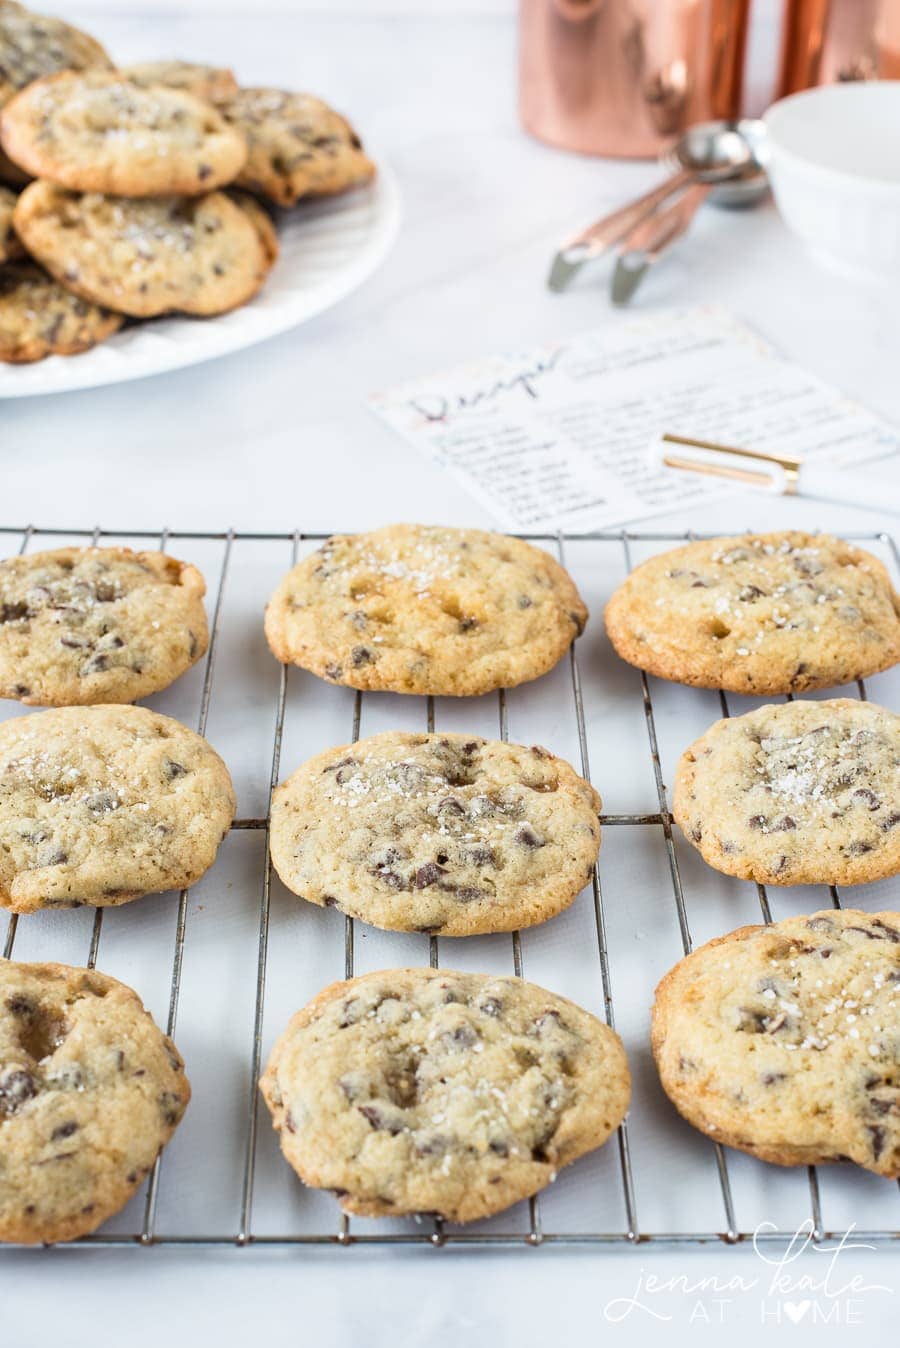 A group of cookies, resting on a wire cooling rack on the countertop